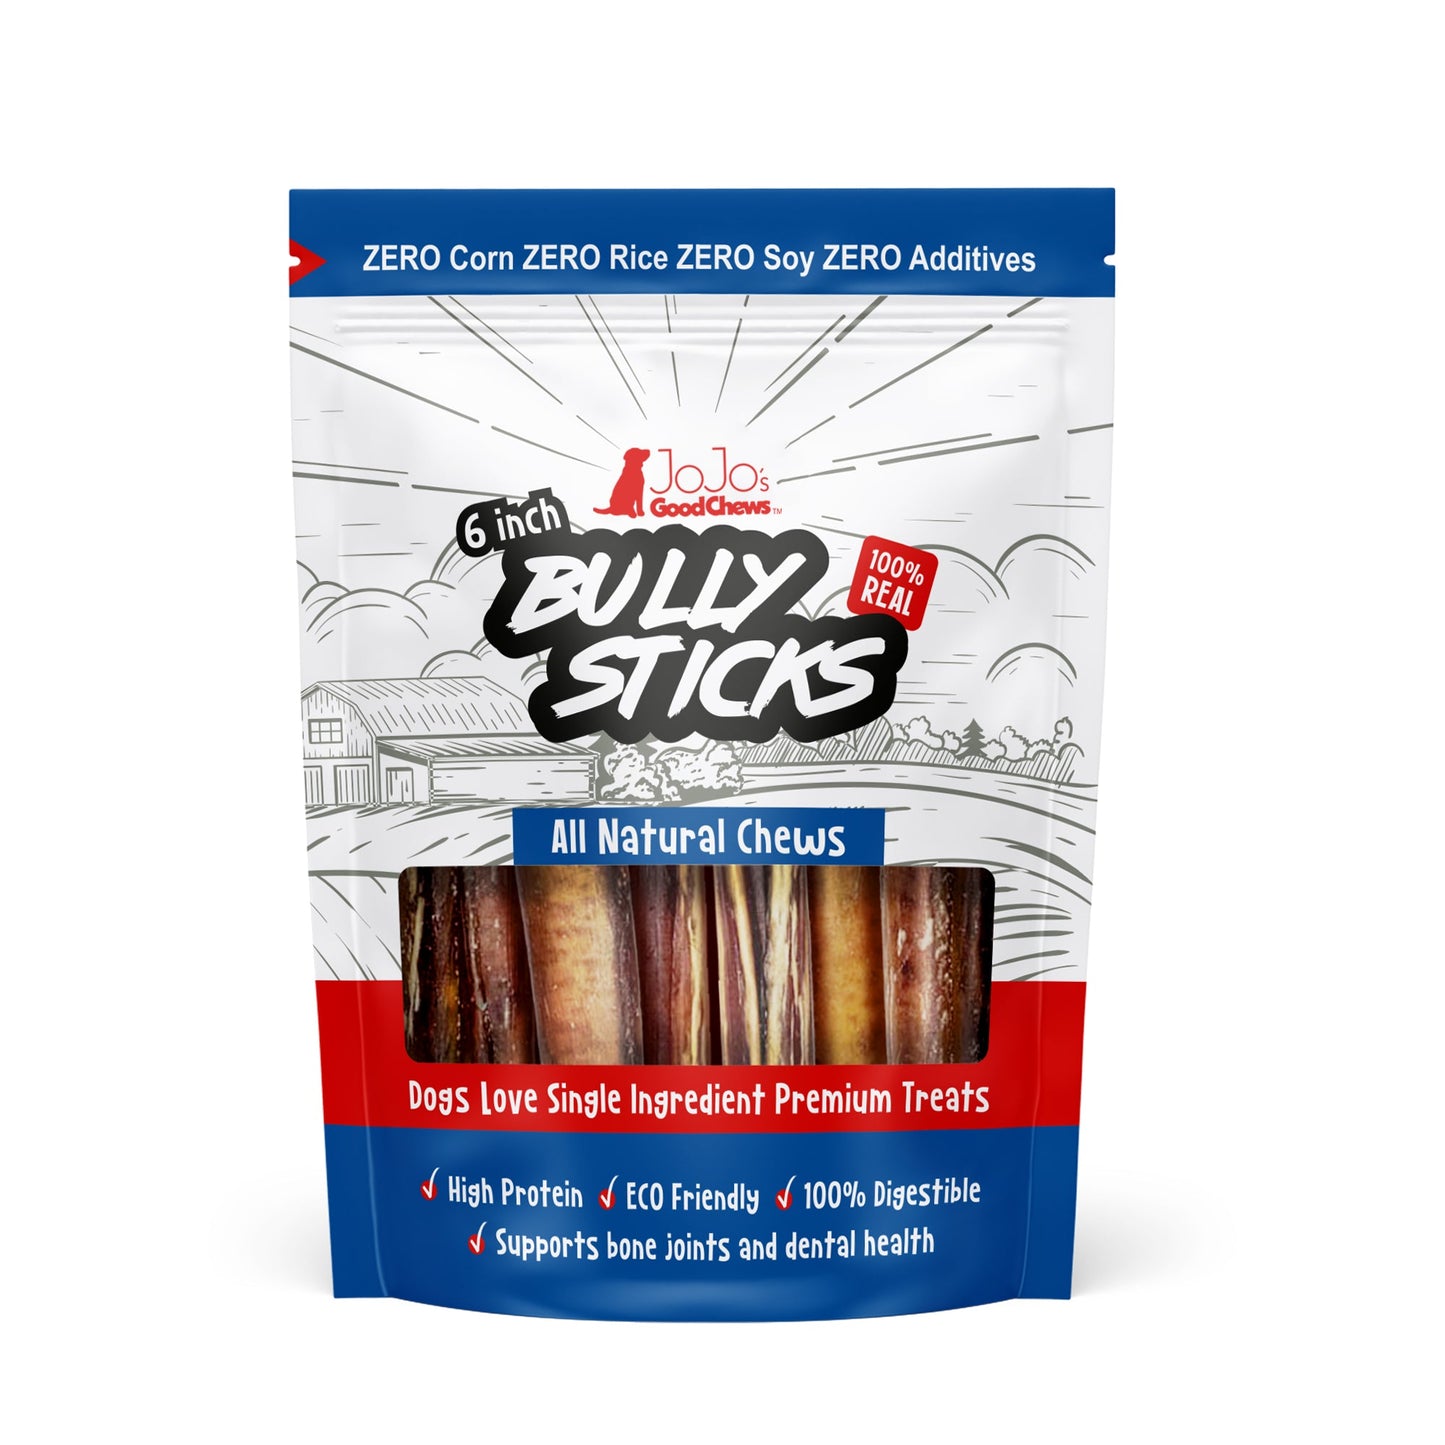 All-Natural Beef Bully Stick Dog Treats - 6" Thick (3-Pack)